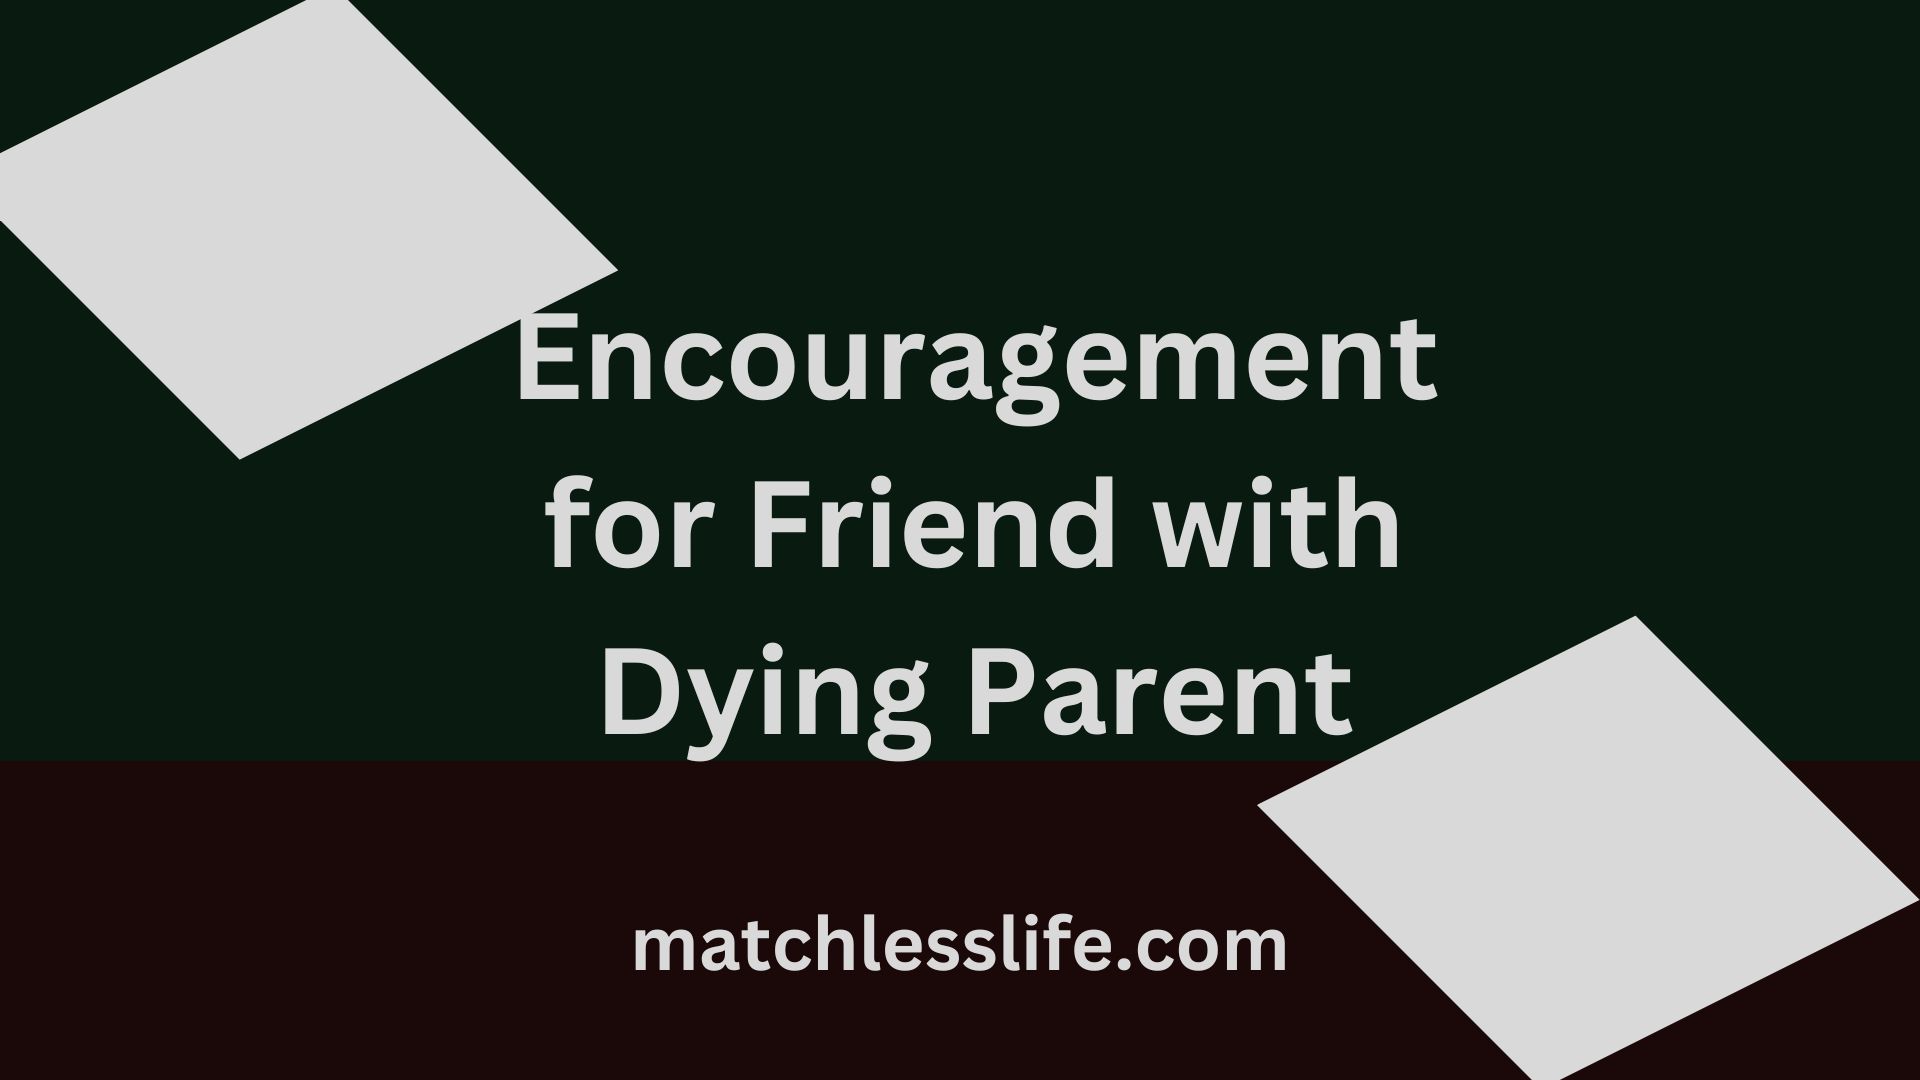 Words of Encouragement for Friend with Dying Parent